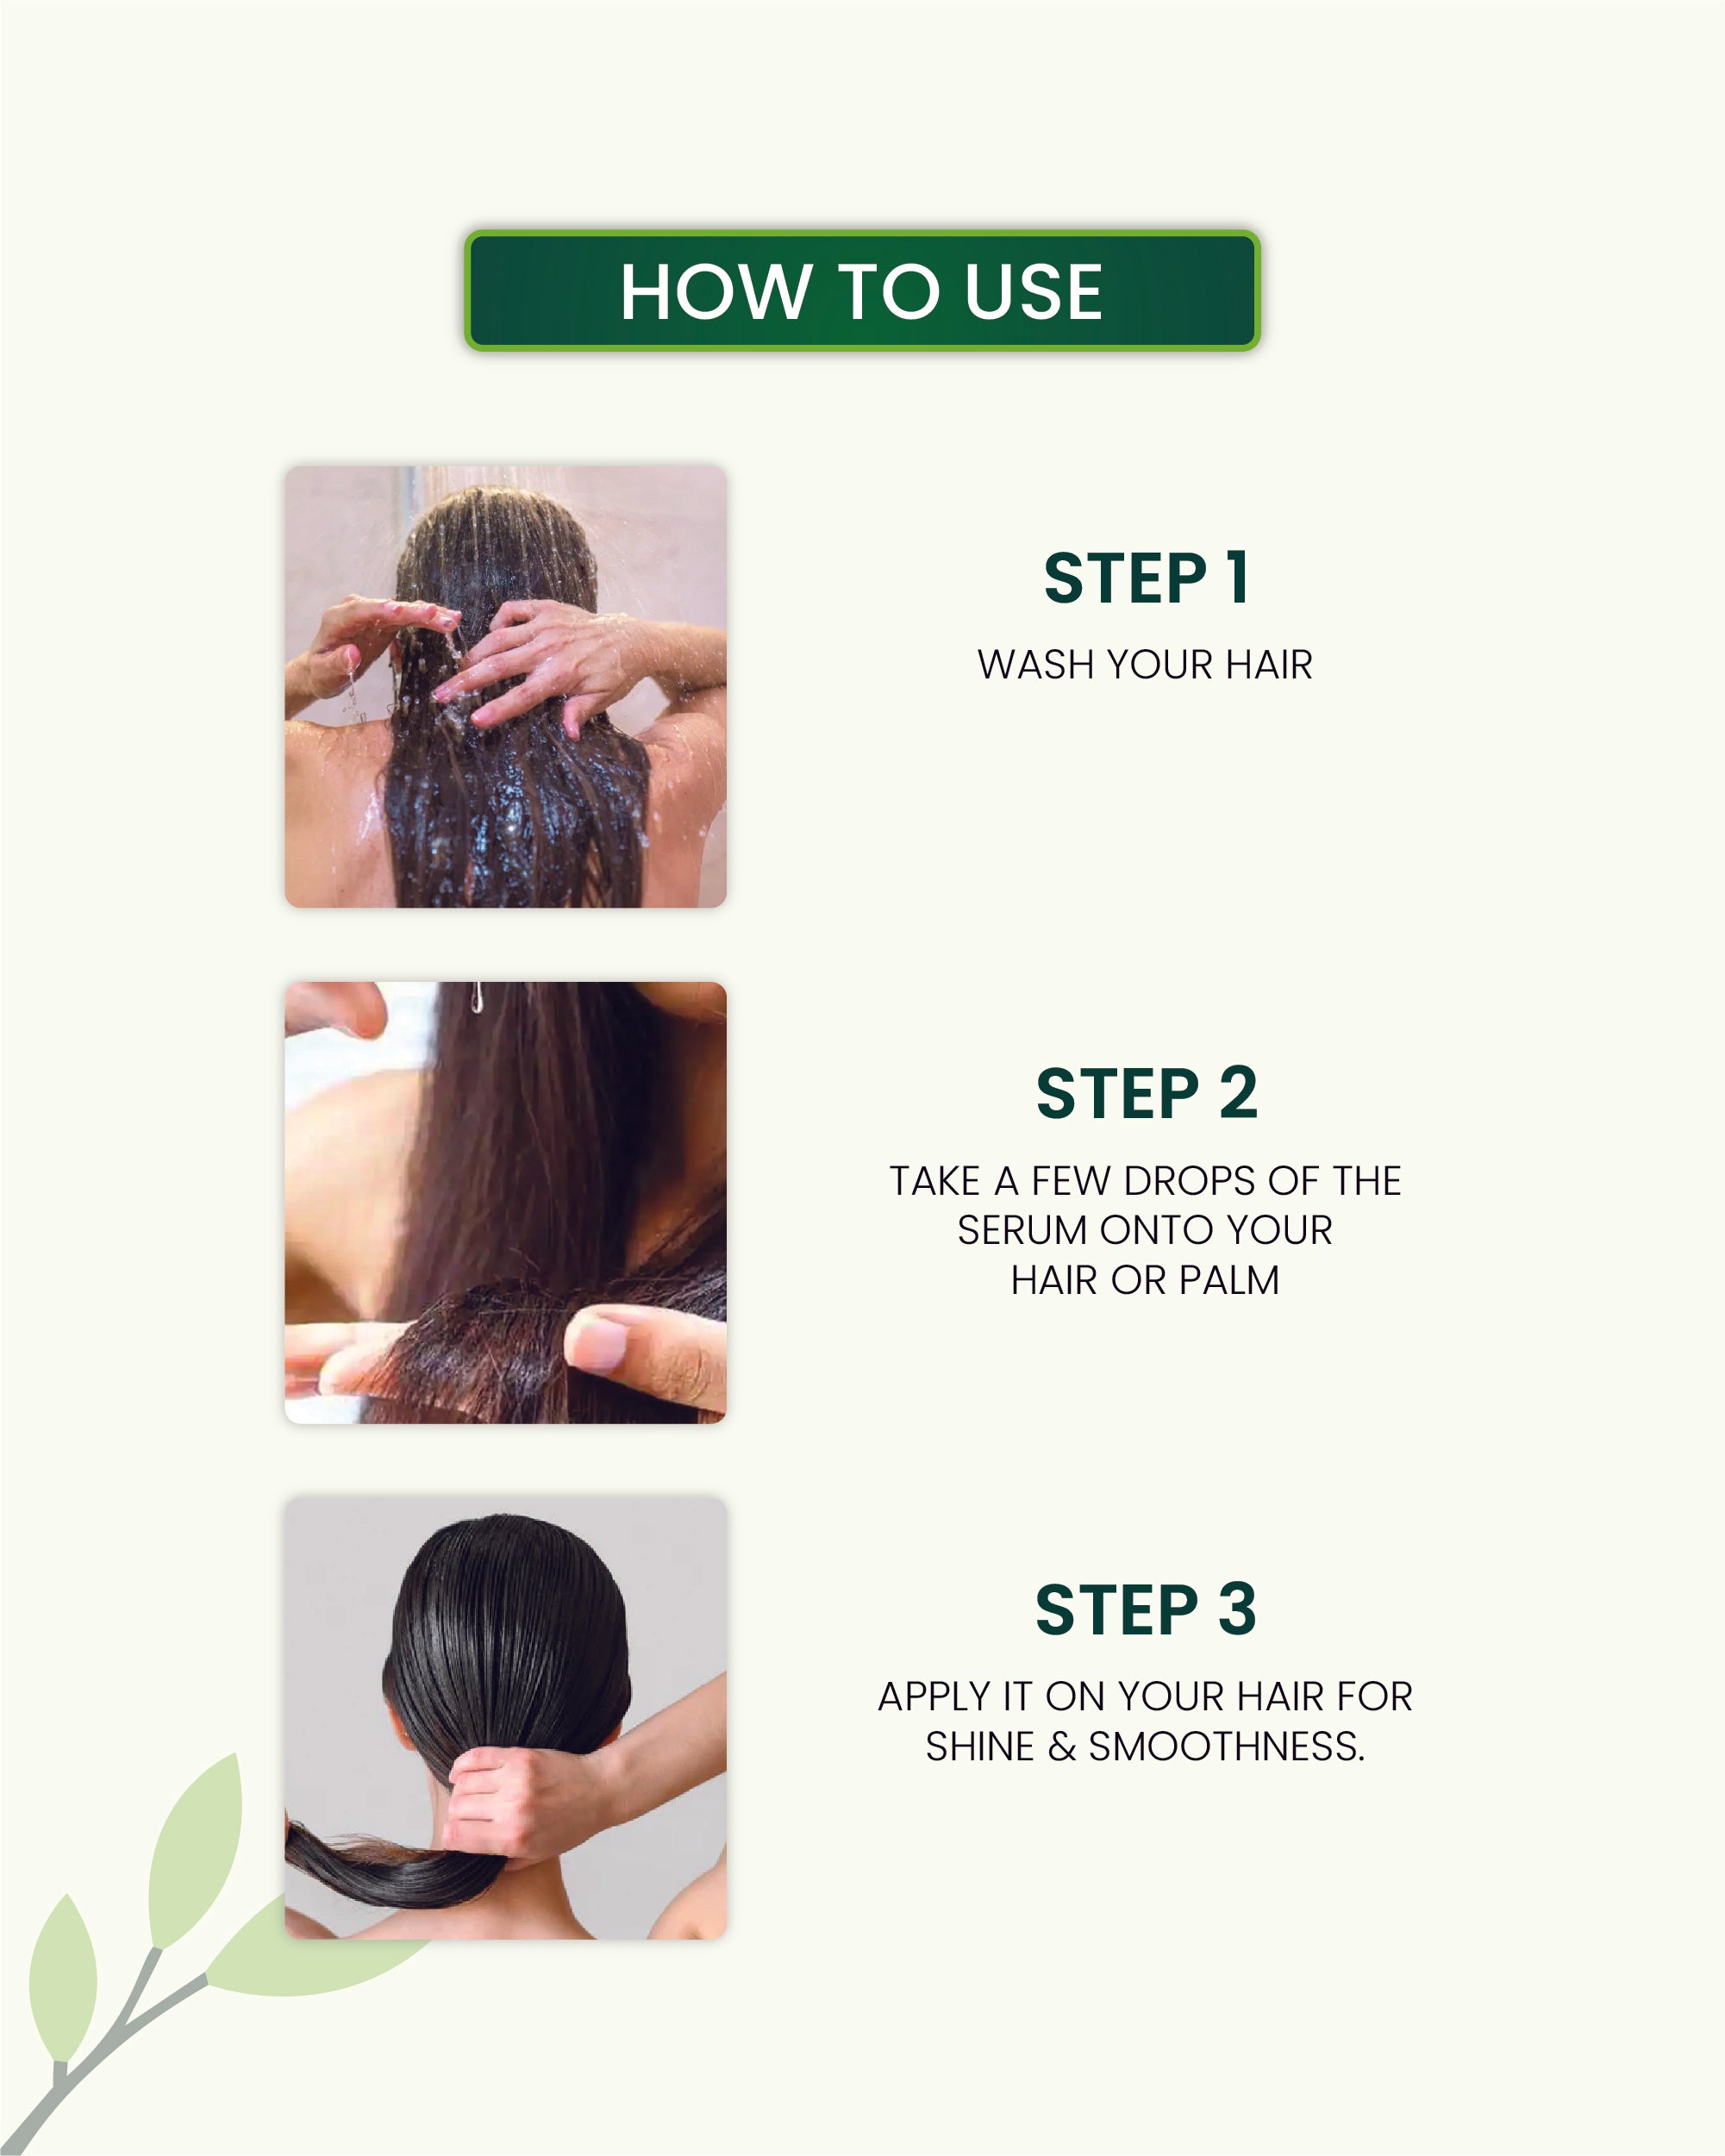 How to Use Hair Growth Serum